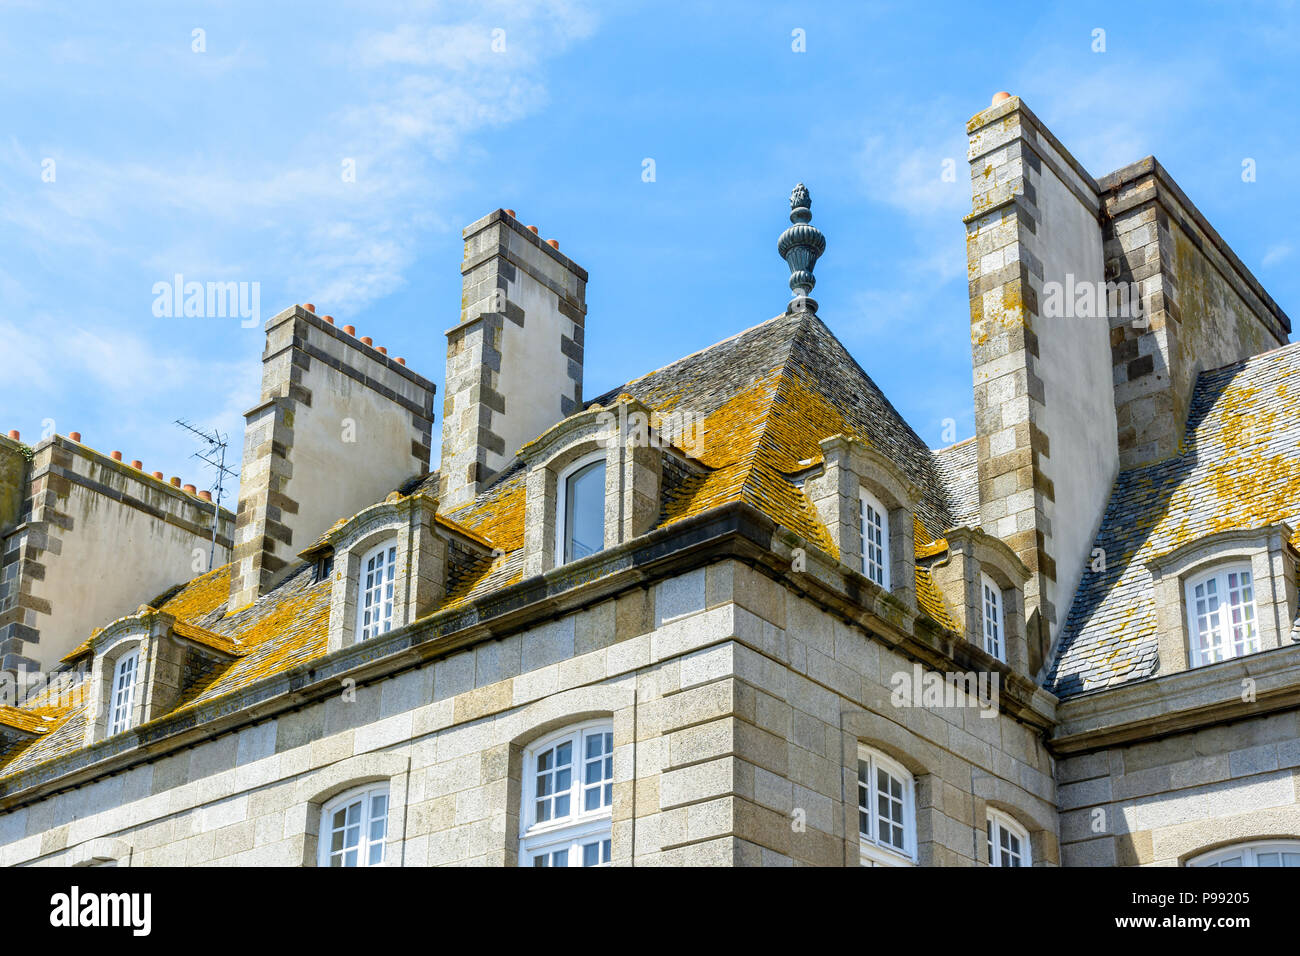 The top of a residential building in the old city of Saint-Malo with a slate roof covered with lichen, dormer windows and chimneys against blue sky. Stock Photo